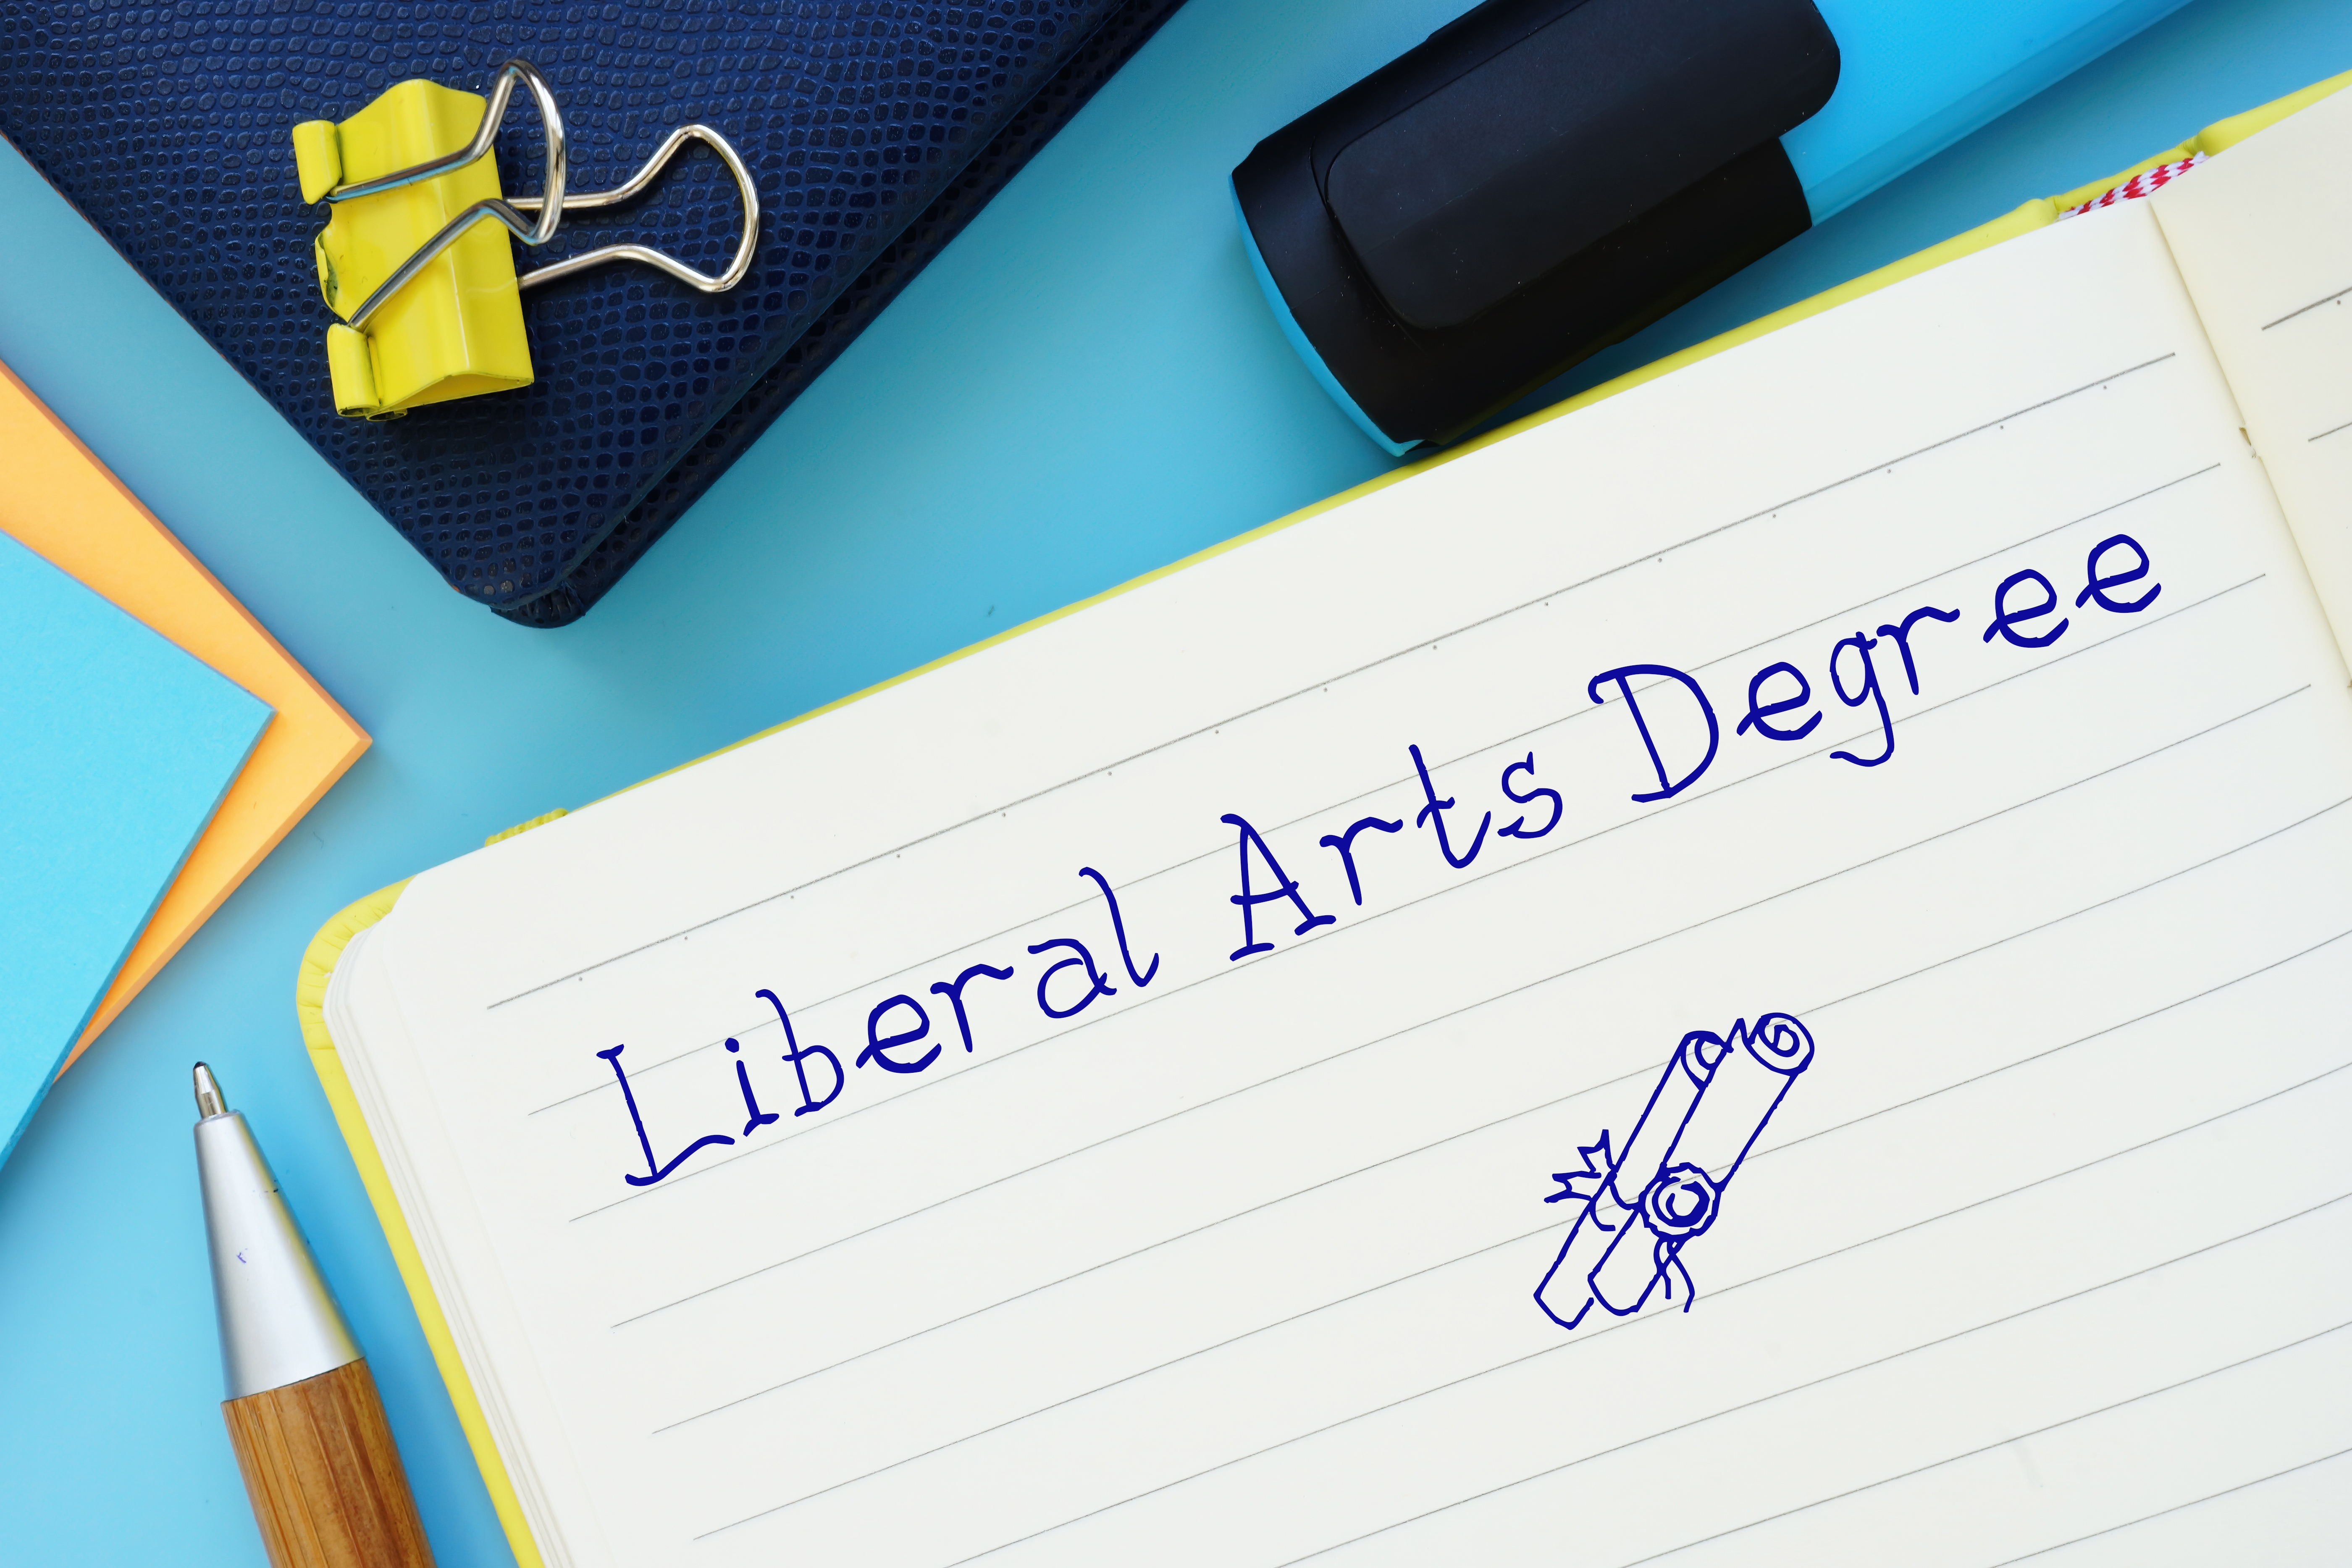 Liberal Arts Education in India: Definition, History, Scope & Future